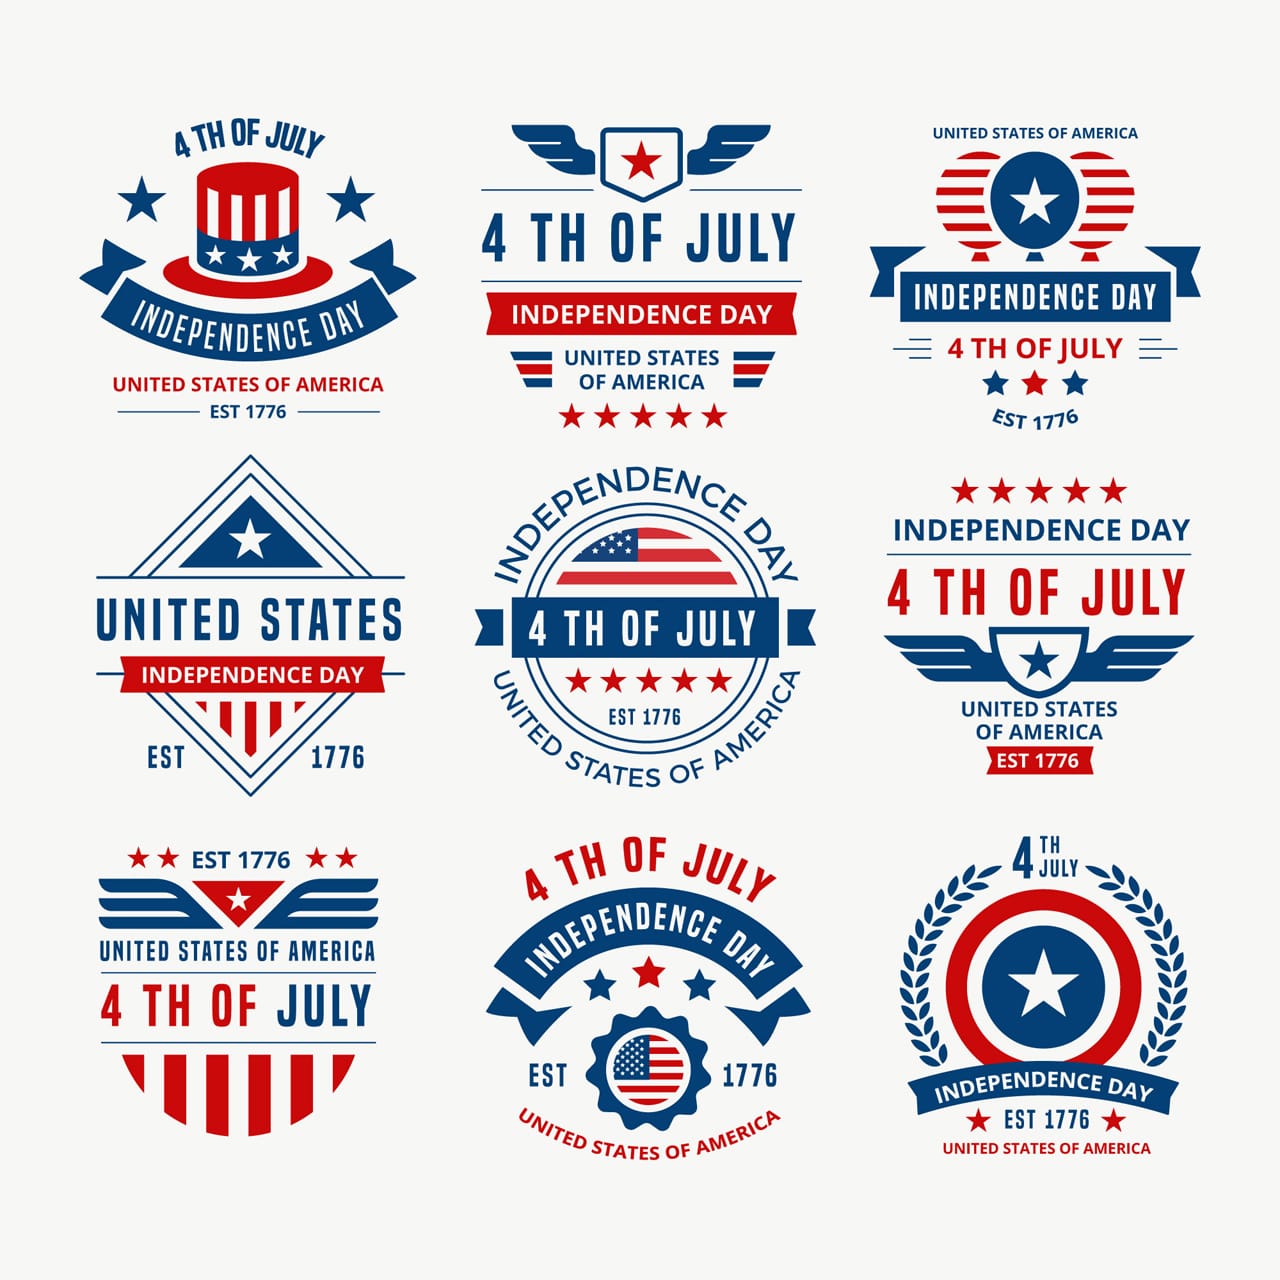 Ribbon banner clipart fourth july badge collection hand drawing sketch cartoon image